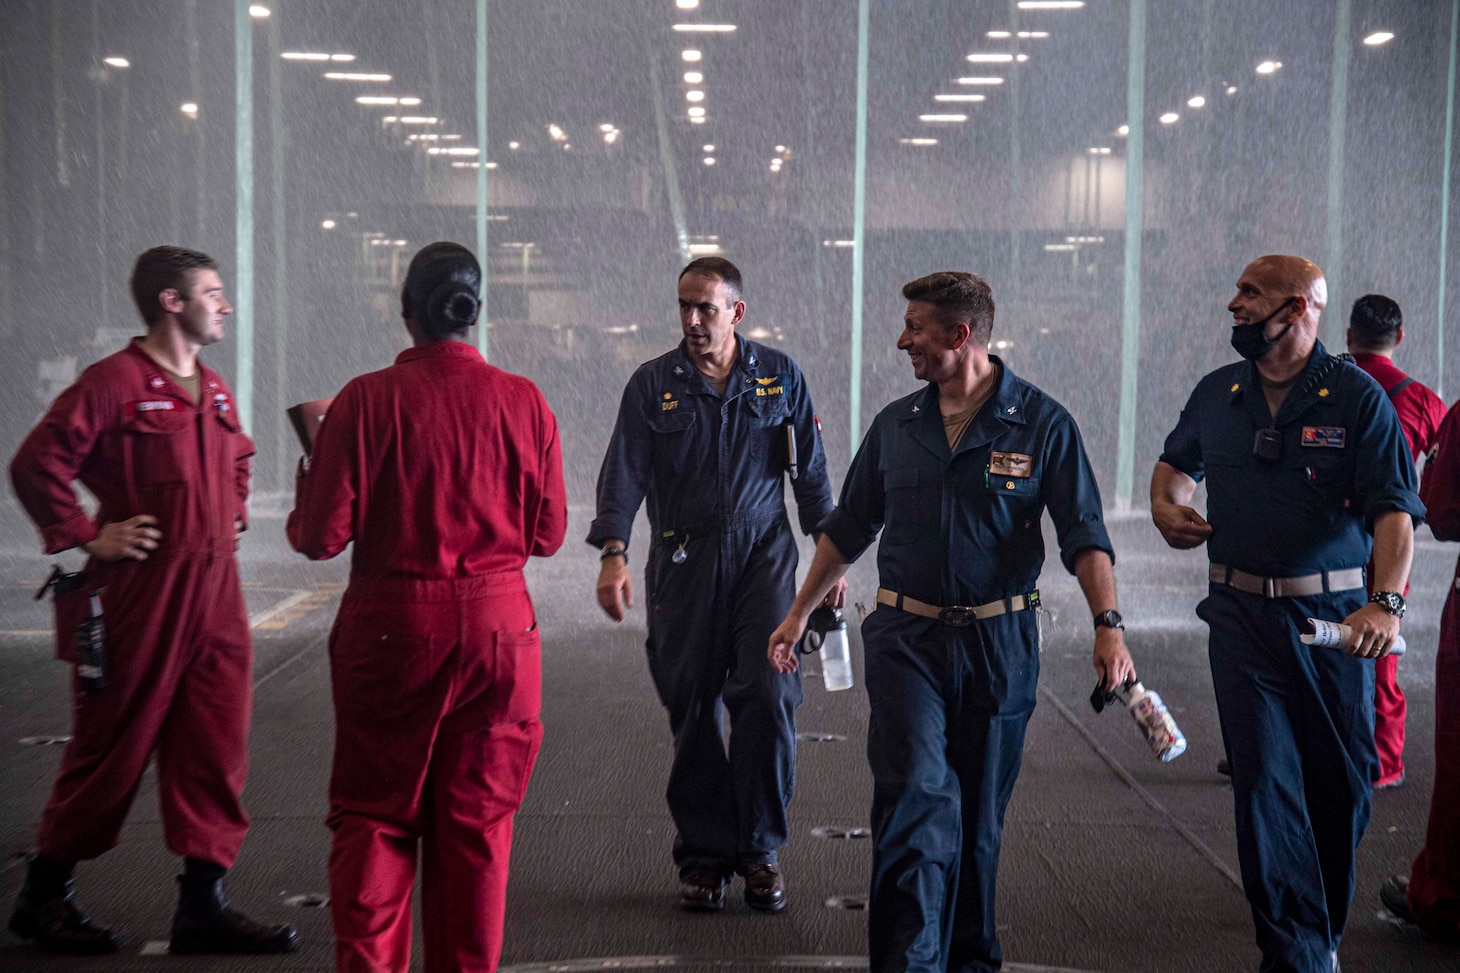 Capt. Gavin Duff, center, commanding officer of the Nimitz-class aircraft carrier USS Harry S. Truman (CVN 75), and Capt. Shane Marchesi, Truman's executive officer, speak with Sailors during an operational test of the aqueous film-forming foam sprinkler system in Truman's hangar bay.